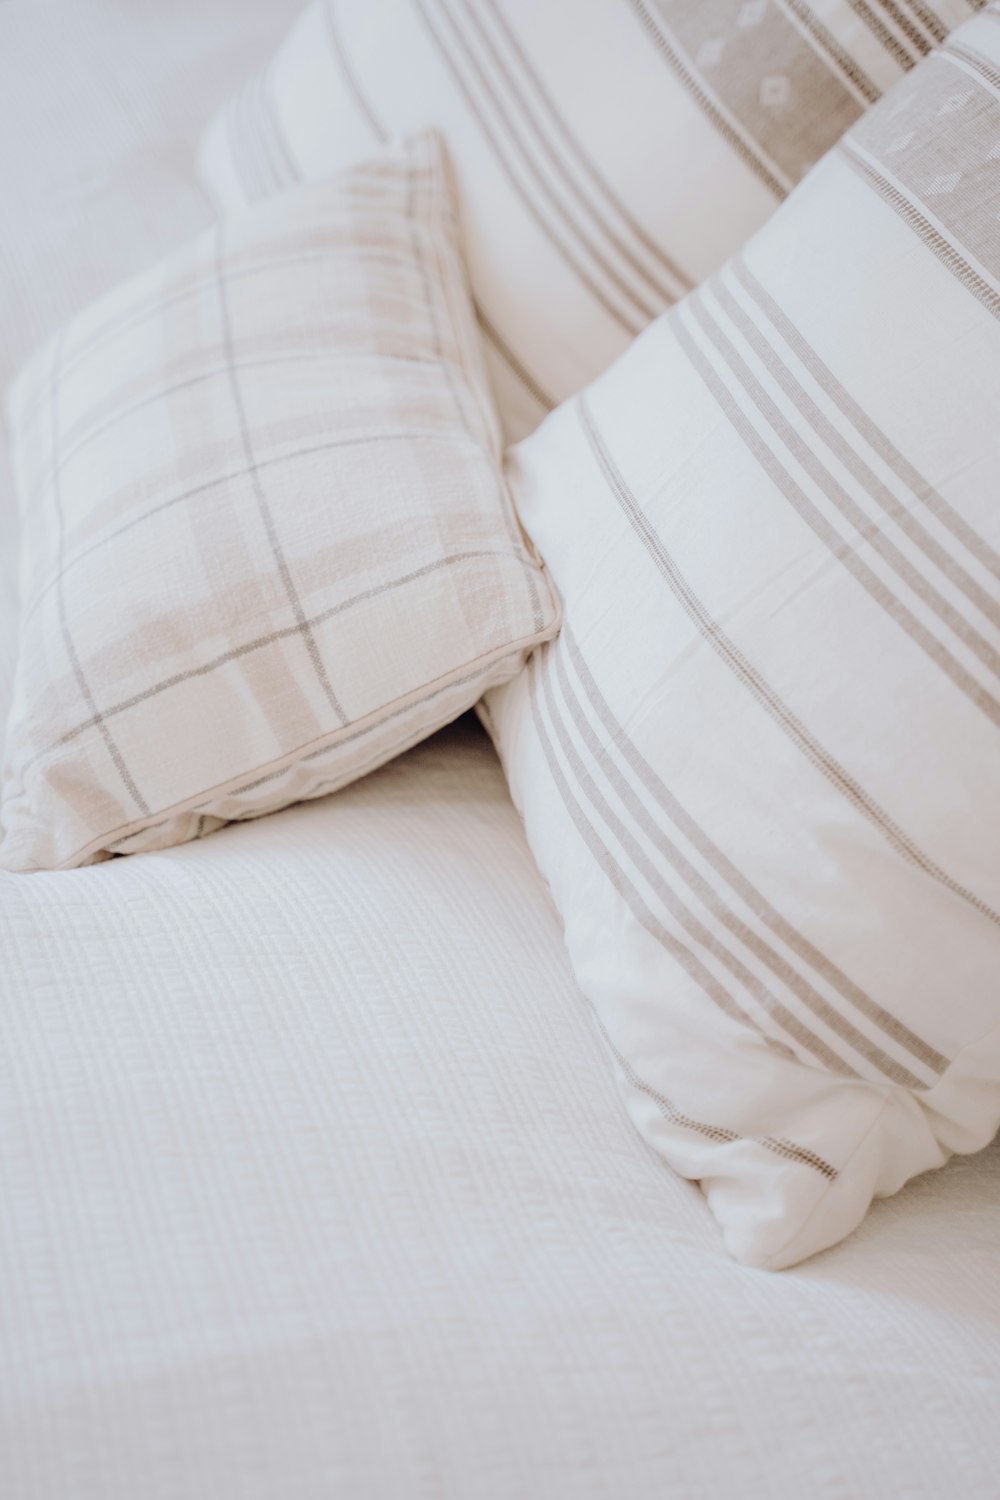 a close up of some pillows on a bed